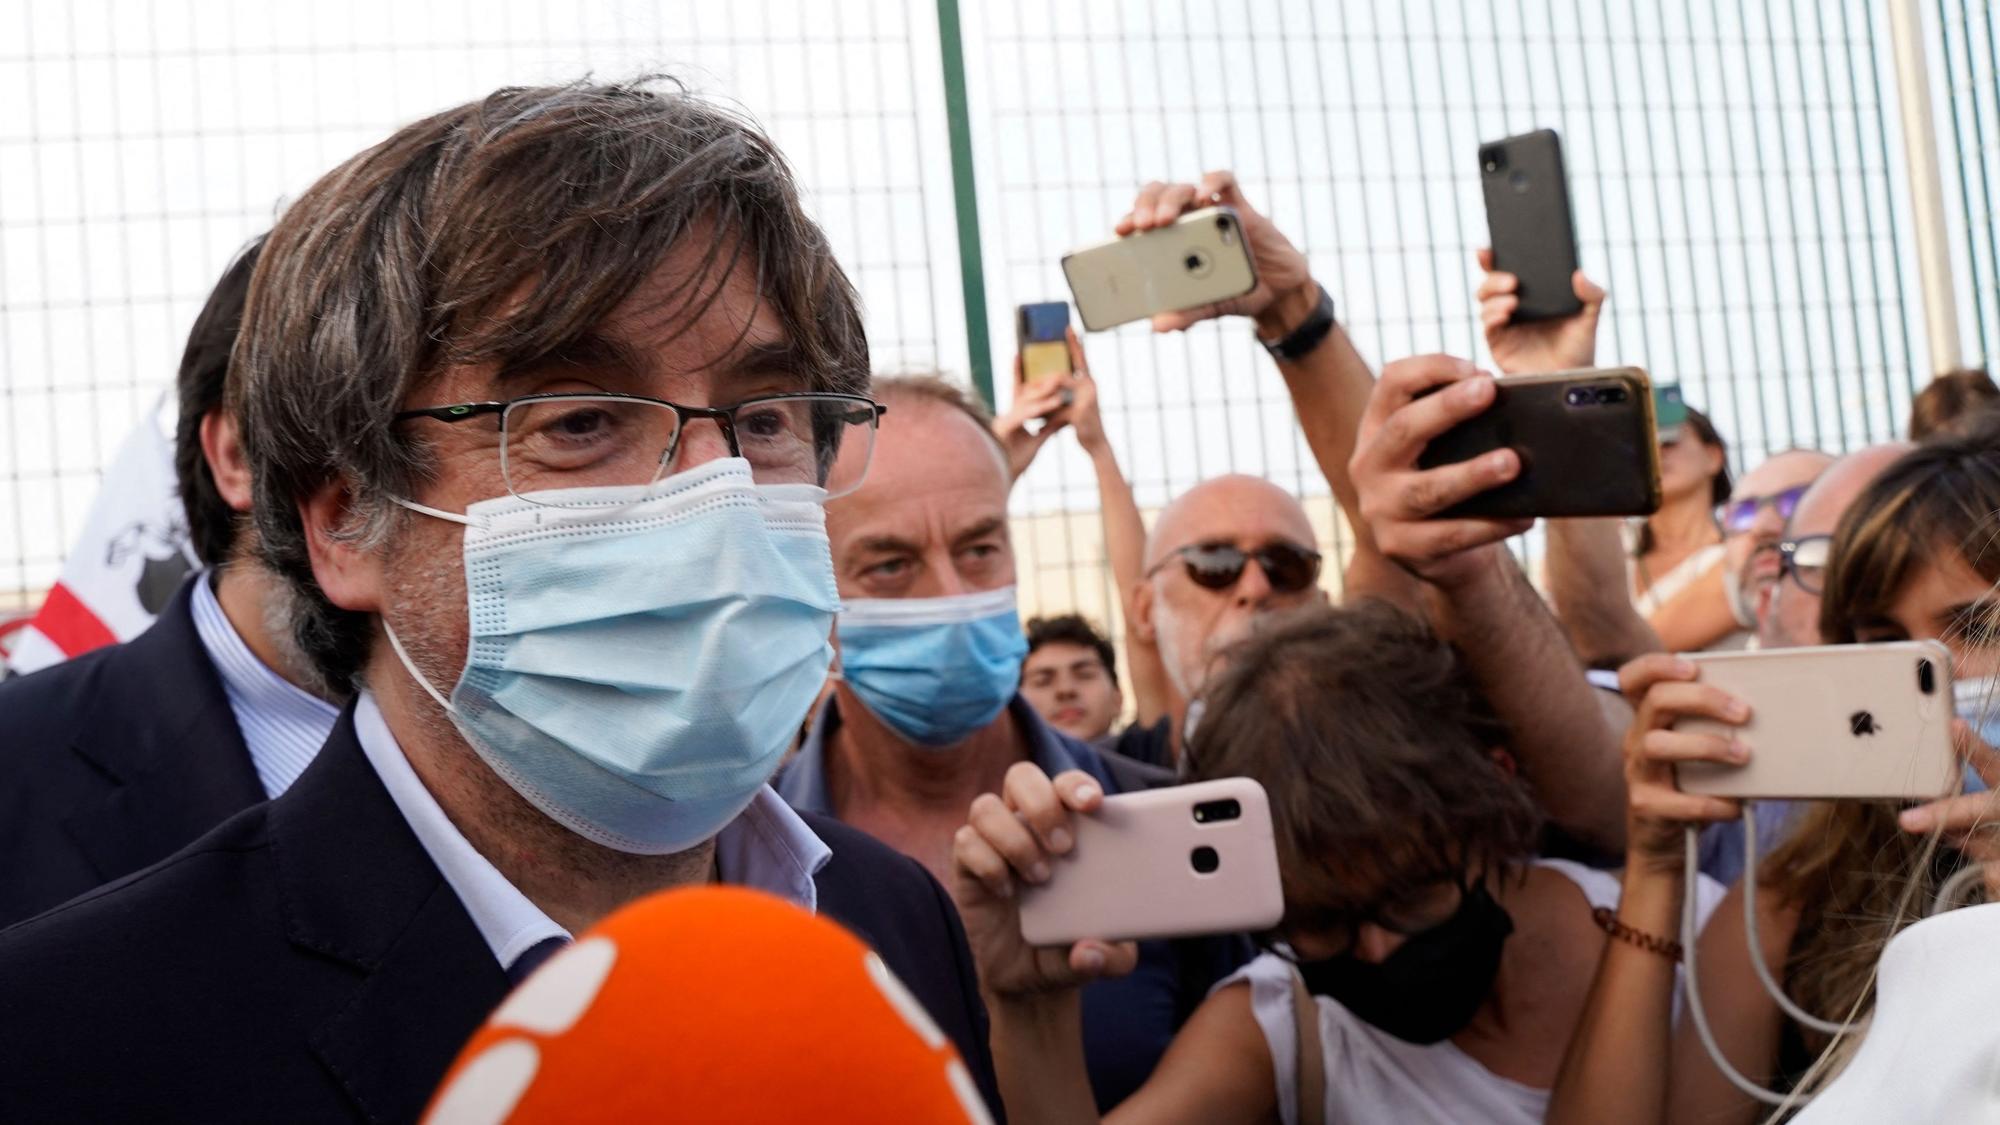 Exiled former Catalan president Carles Puigdemont leaves after being released from jail on September 24, 2021 in Sassari, Sardinia island, Italy. - Exiled former Catalan president Carles Puigdemont, who was arrested in Sardinia on September 23, 2021 at Spain's request, was free to leave the country and his lawyer said Puigdemont would attend the next hearing in his extradition fight, on October 4, 2021. (Photo by Gianni BIDDAU / AFP)